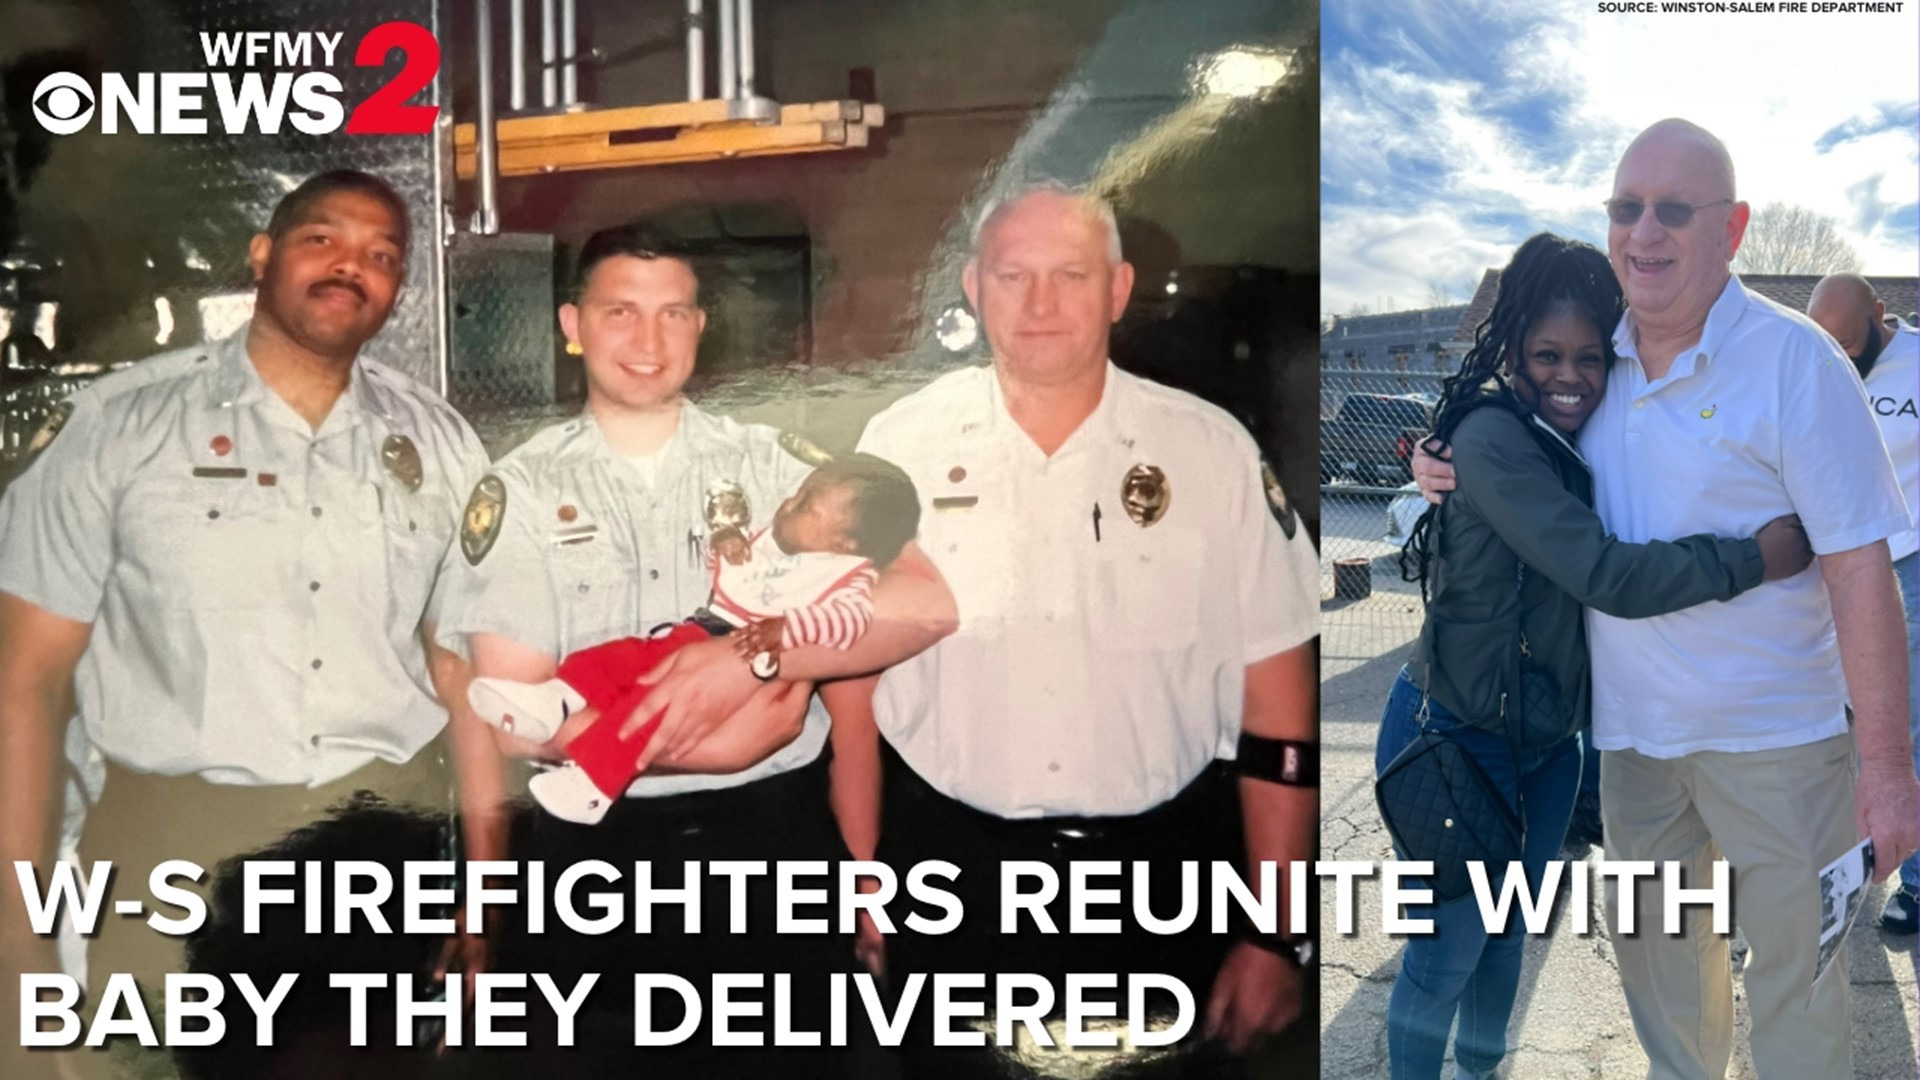 It goes to show that moments like this are why firefighters do their job.